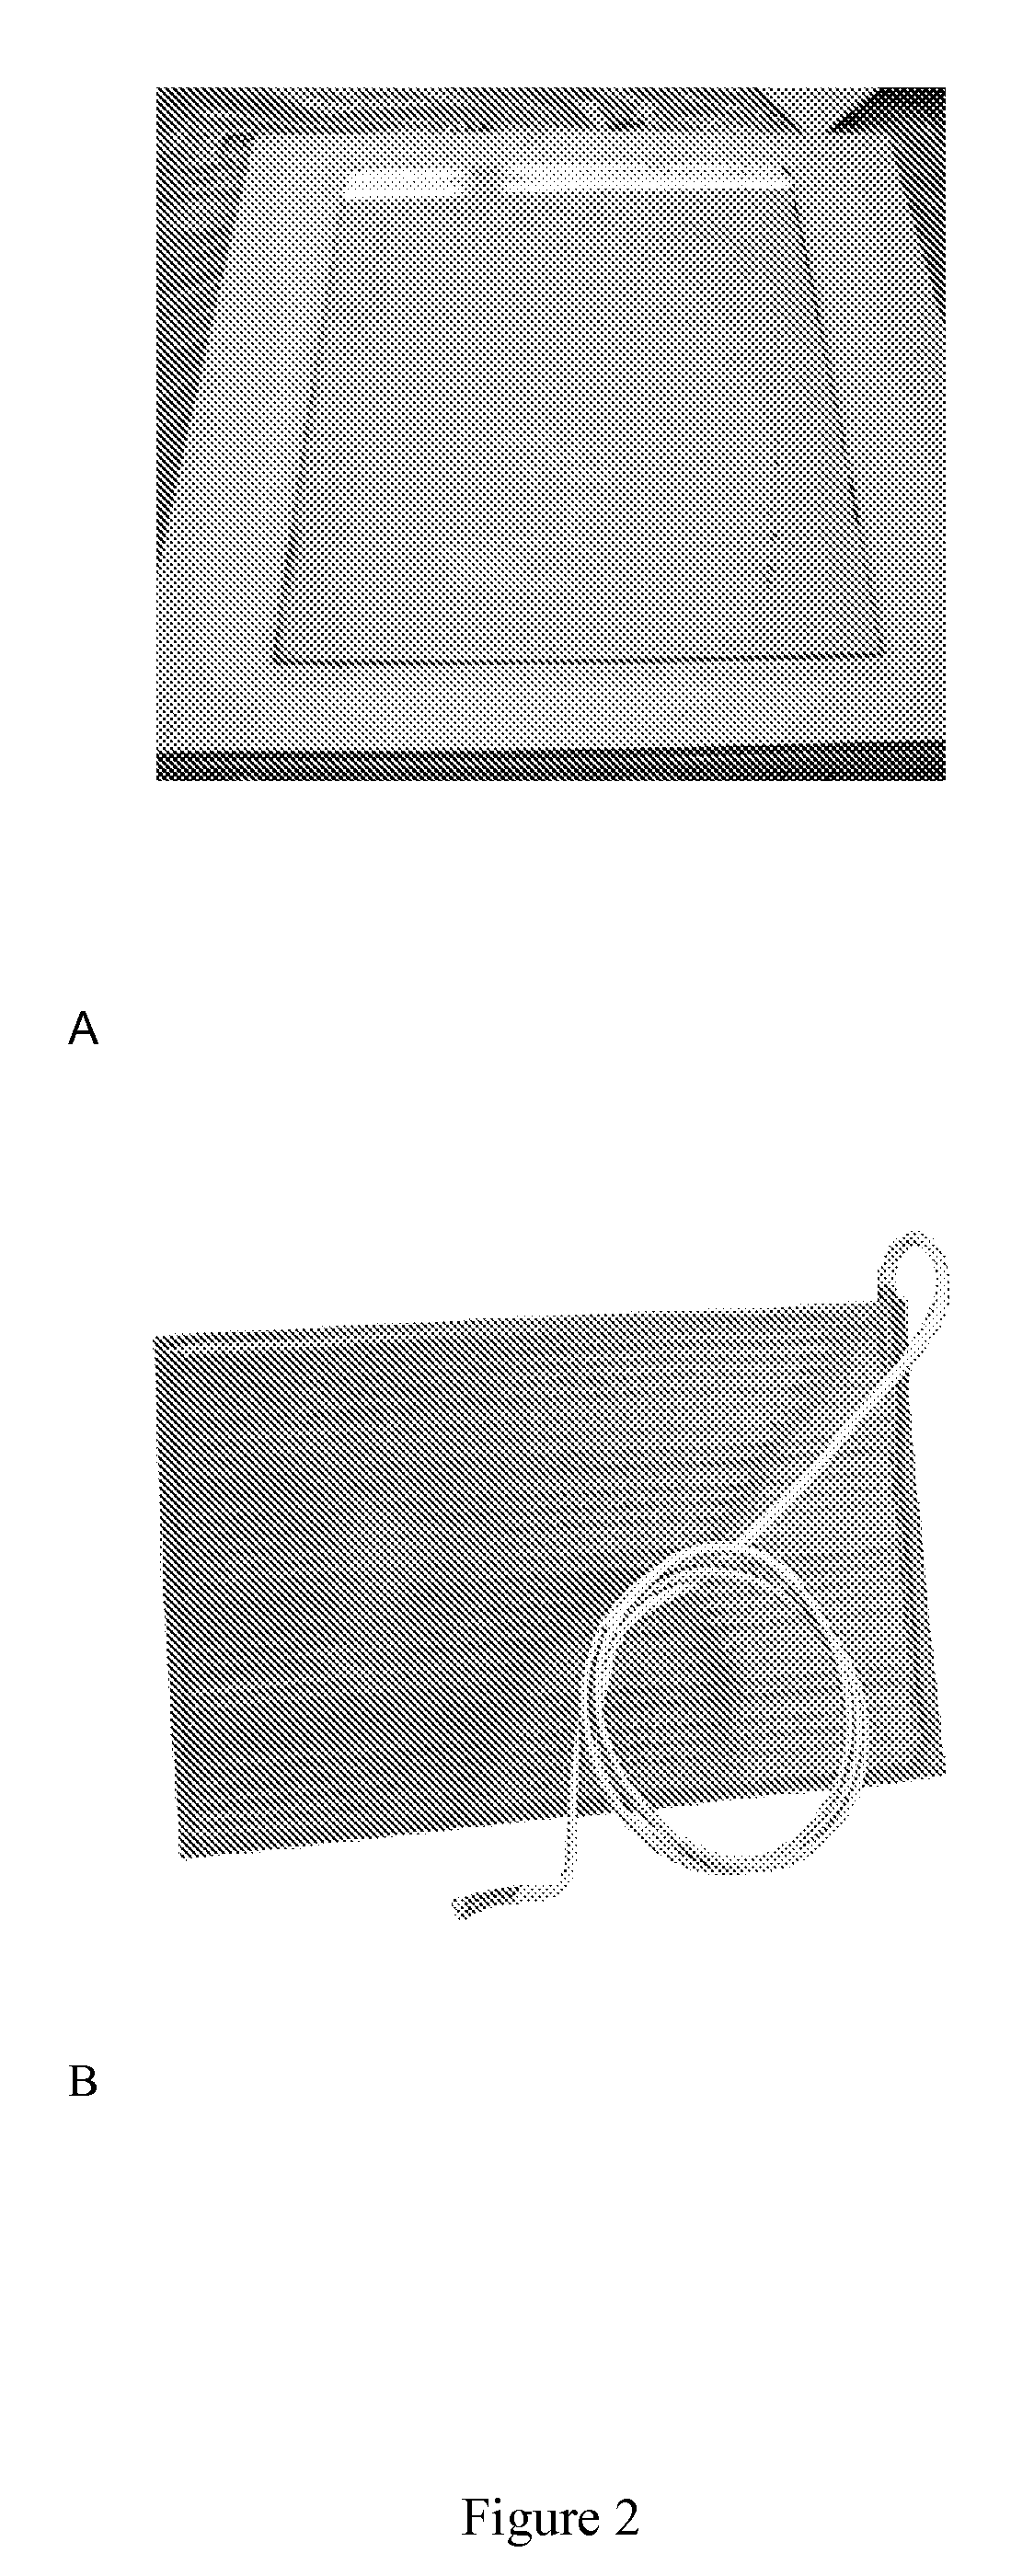 Heat vacuum assisted resin transfer molding processes for manufacturing composite materials